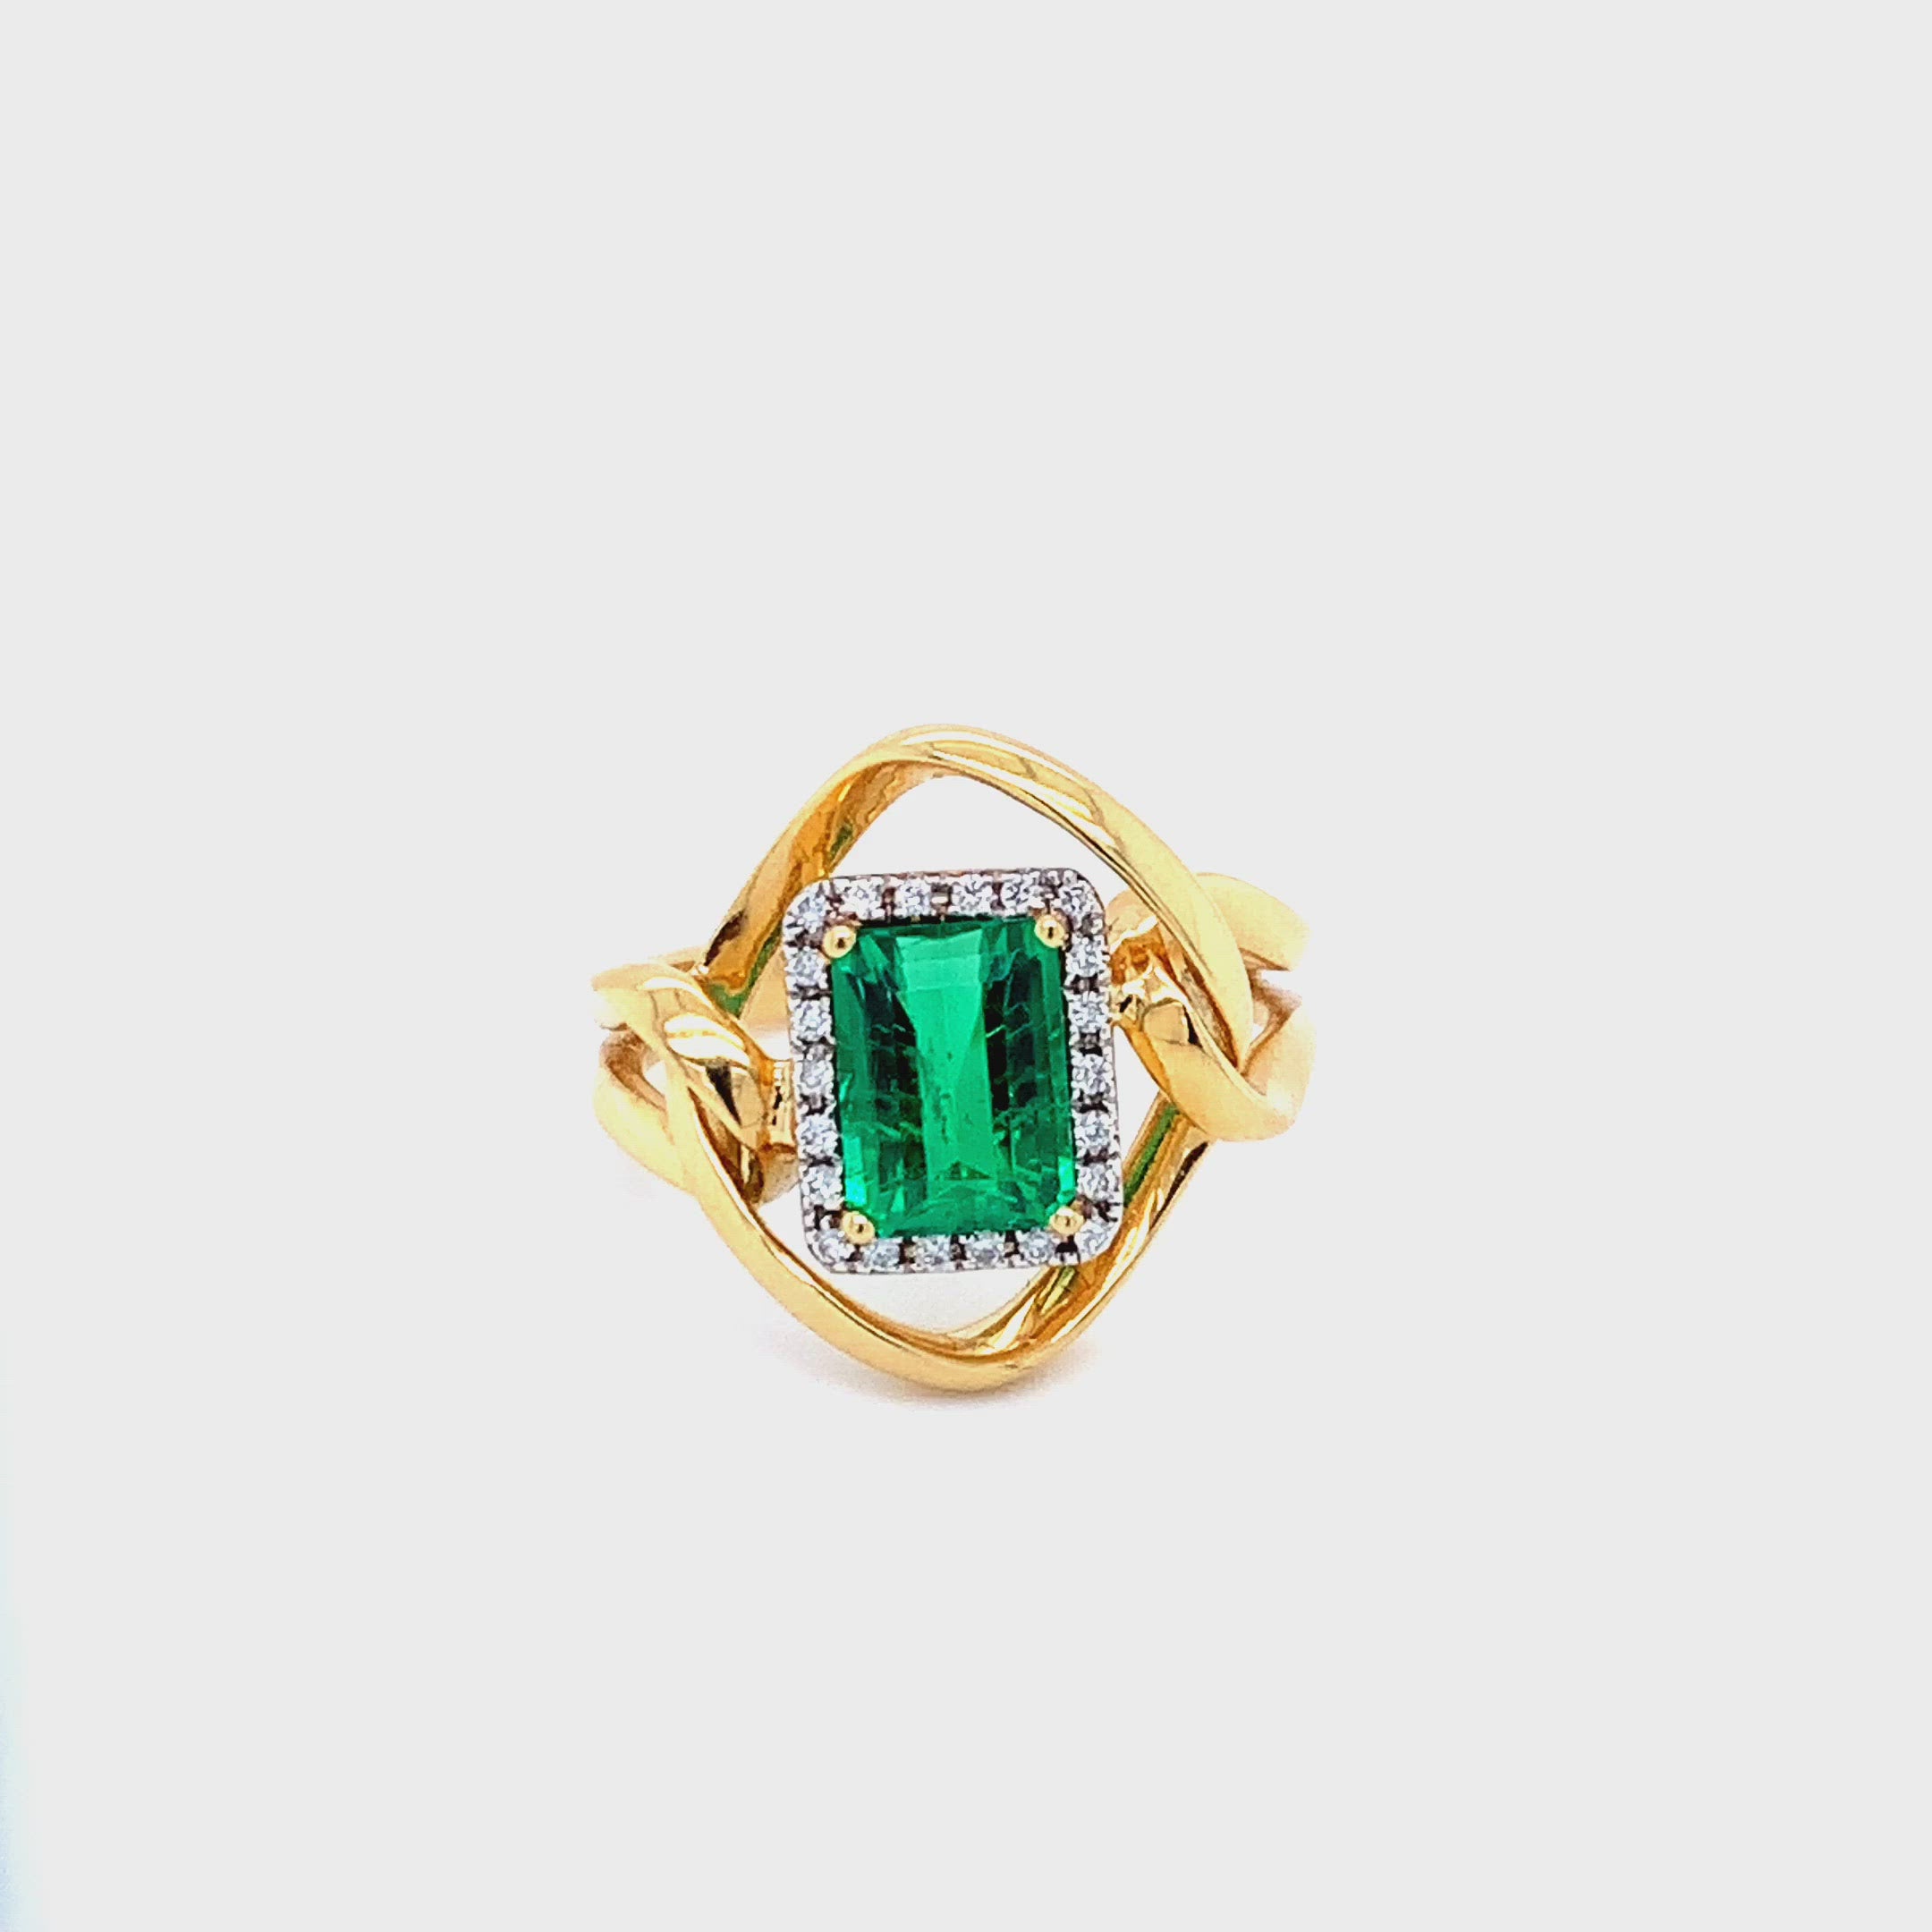 18K YELLOW GOLD WITH A 1.47CT EMERALD AND DIAMONDS IN AUSTIN, TX.